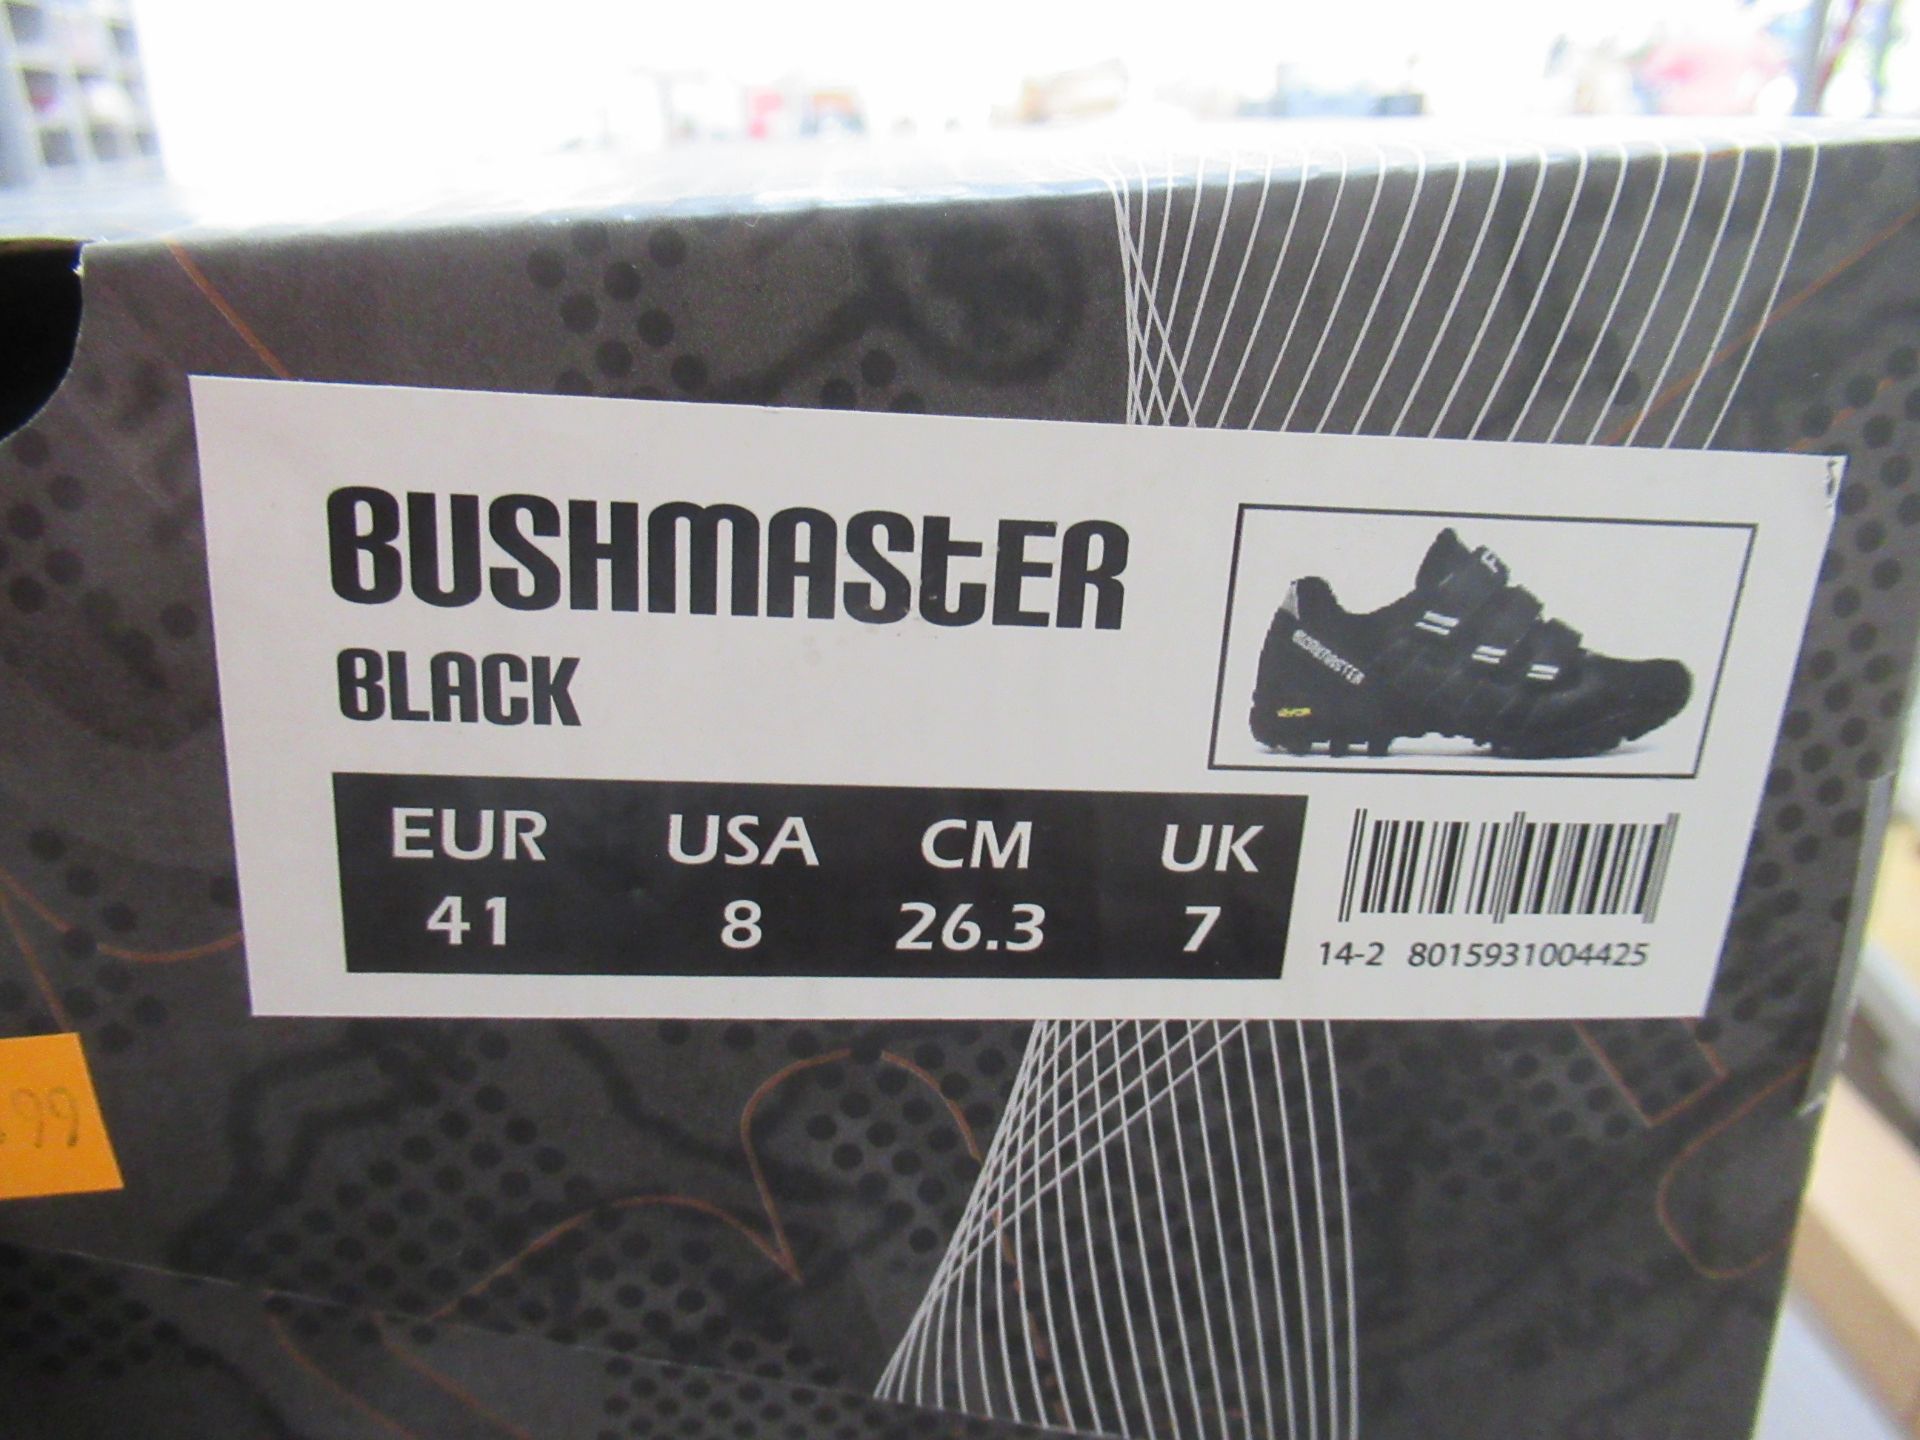 3 x Pairs of FLR cycling shoes - 1 x Bushmaster boxed EU size 41 (RRP£79.99); 1 x F-11 boxed EU size - Image 2 of 10